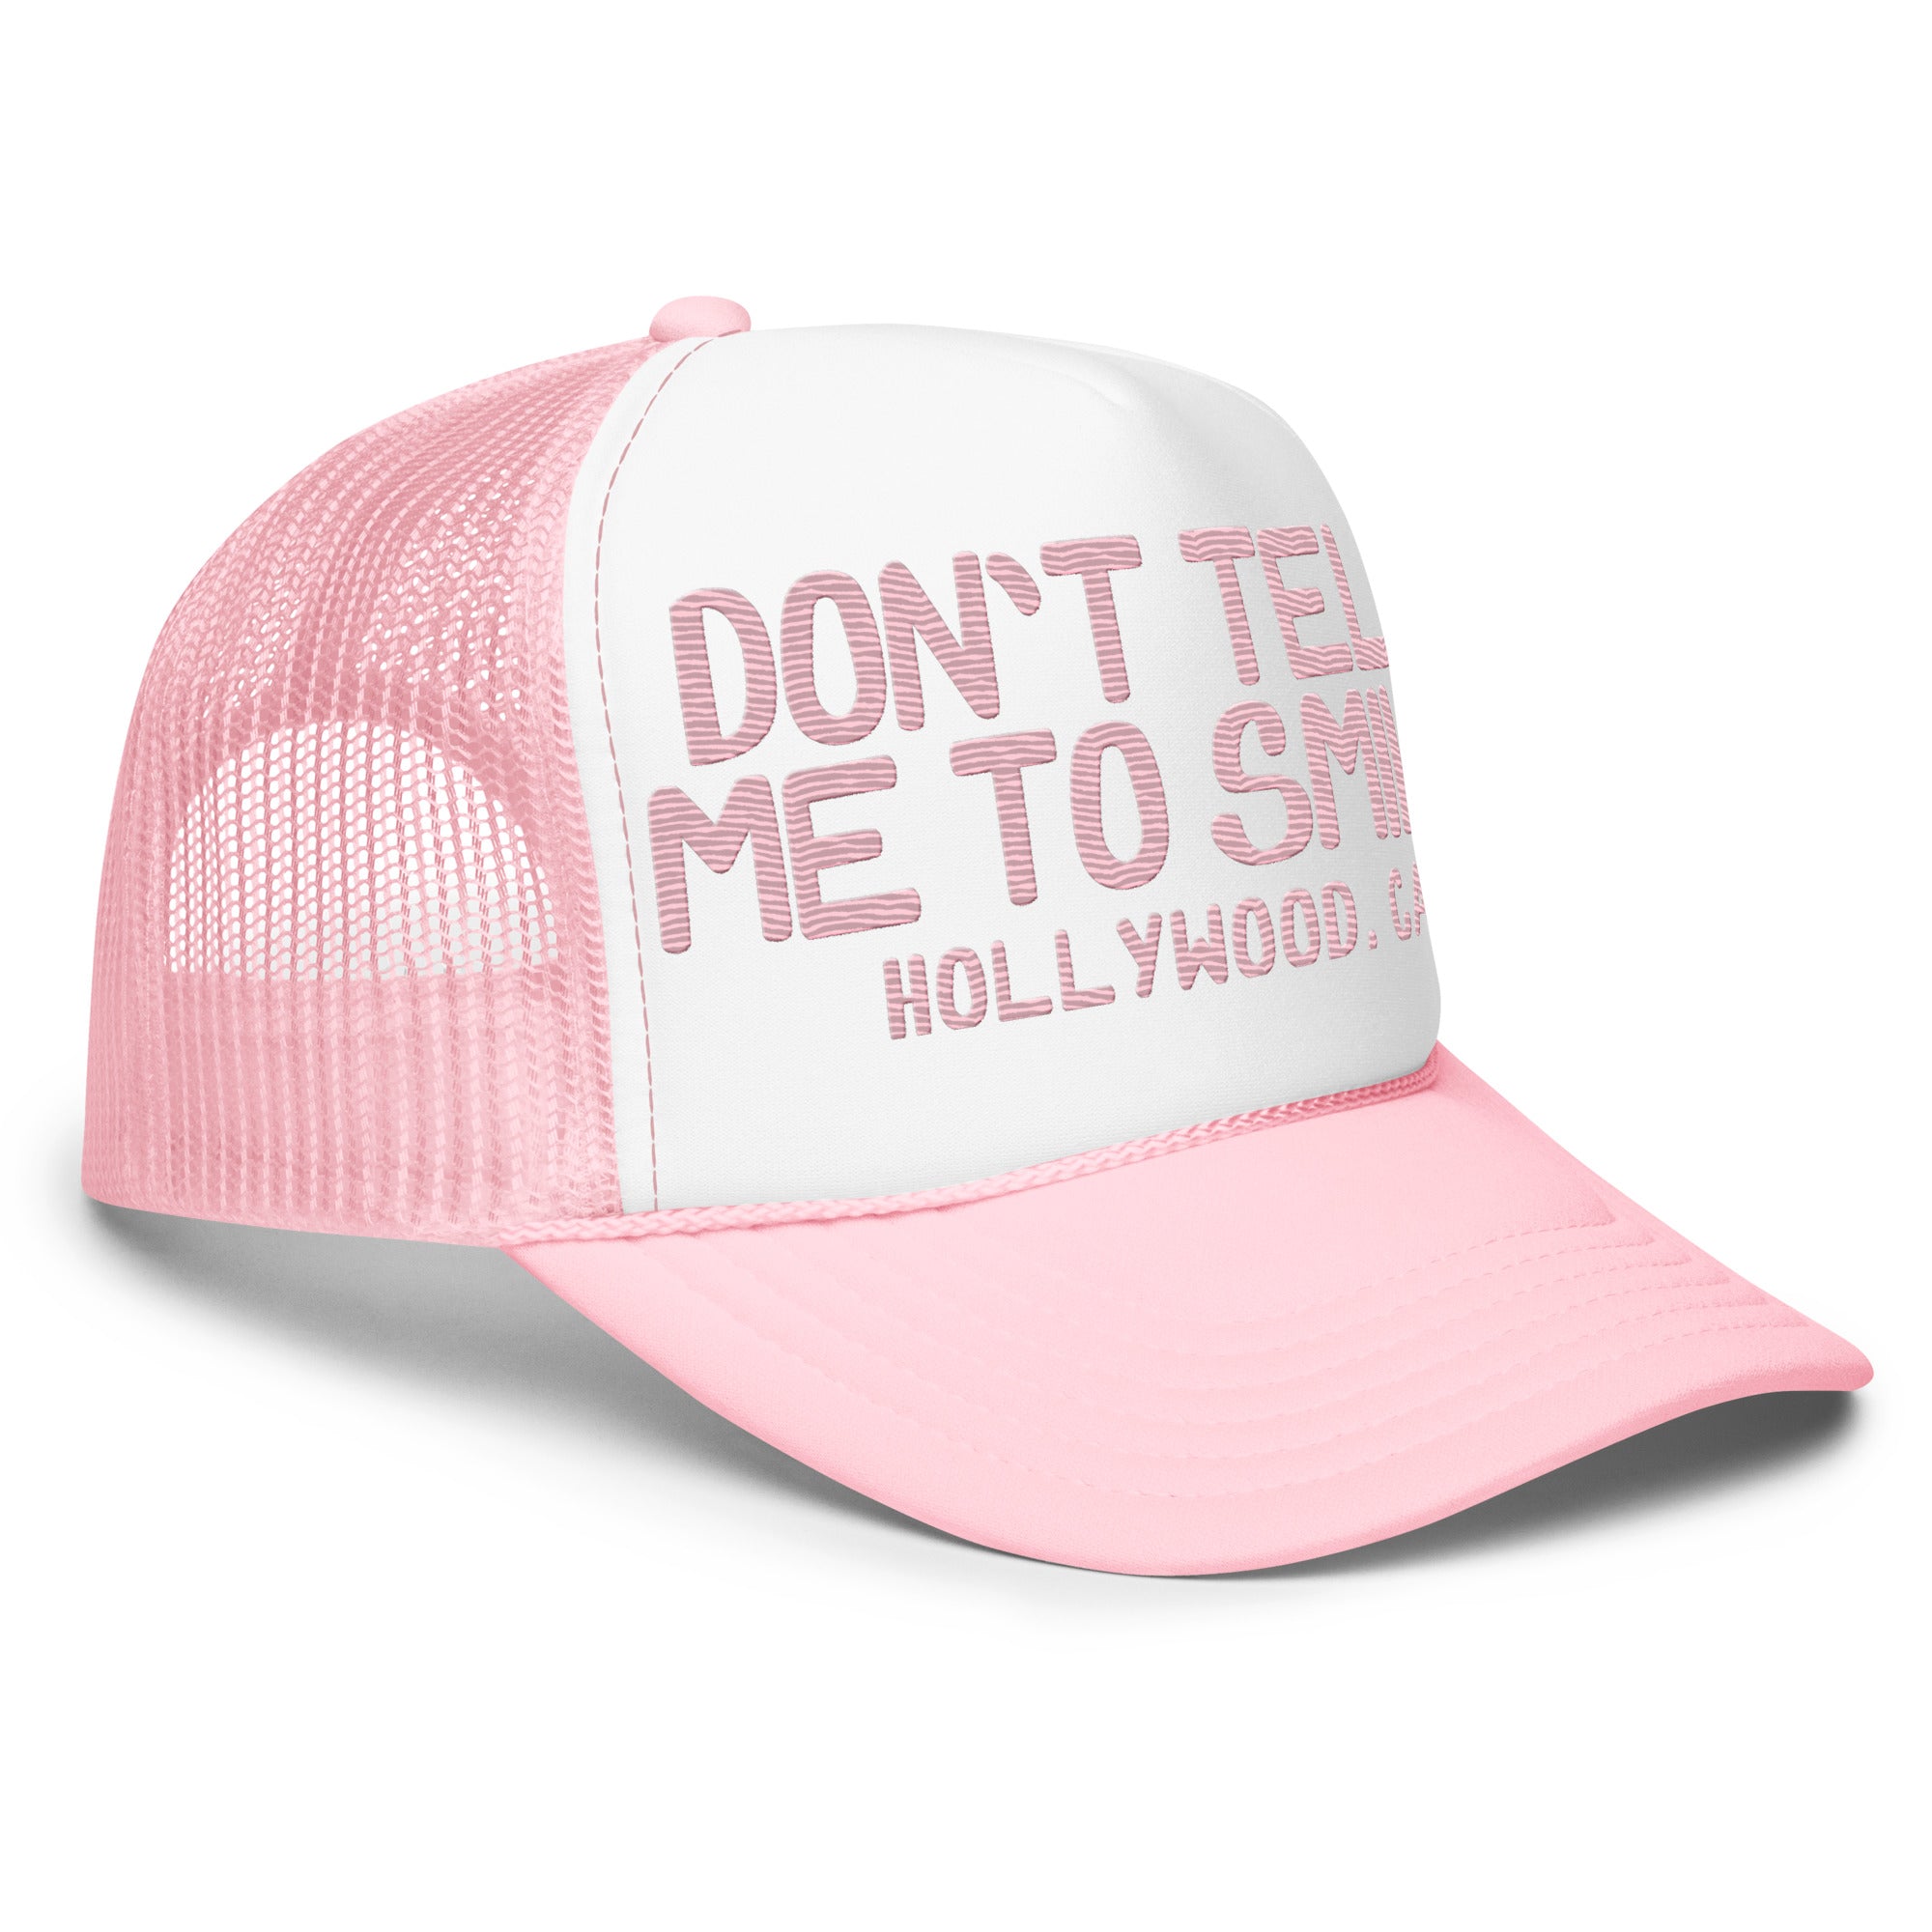 Don't Tell Me Hat - Pink